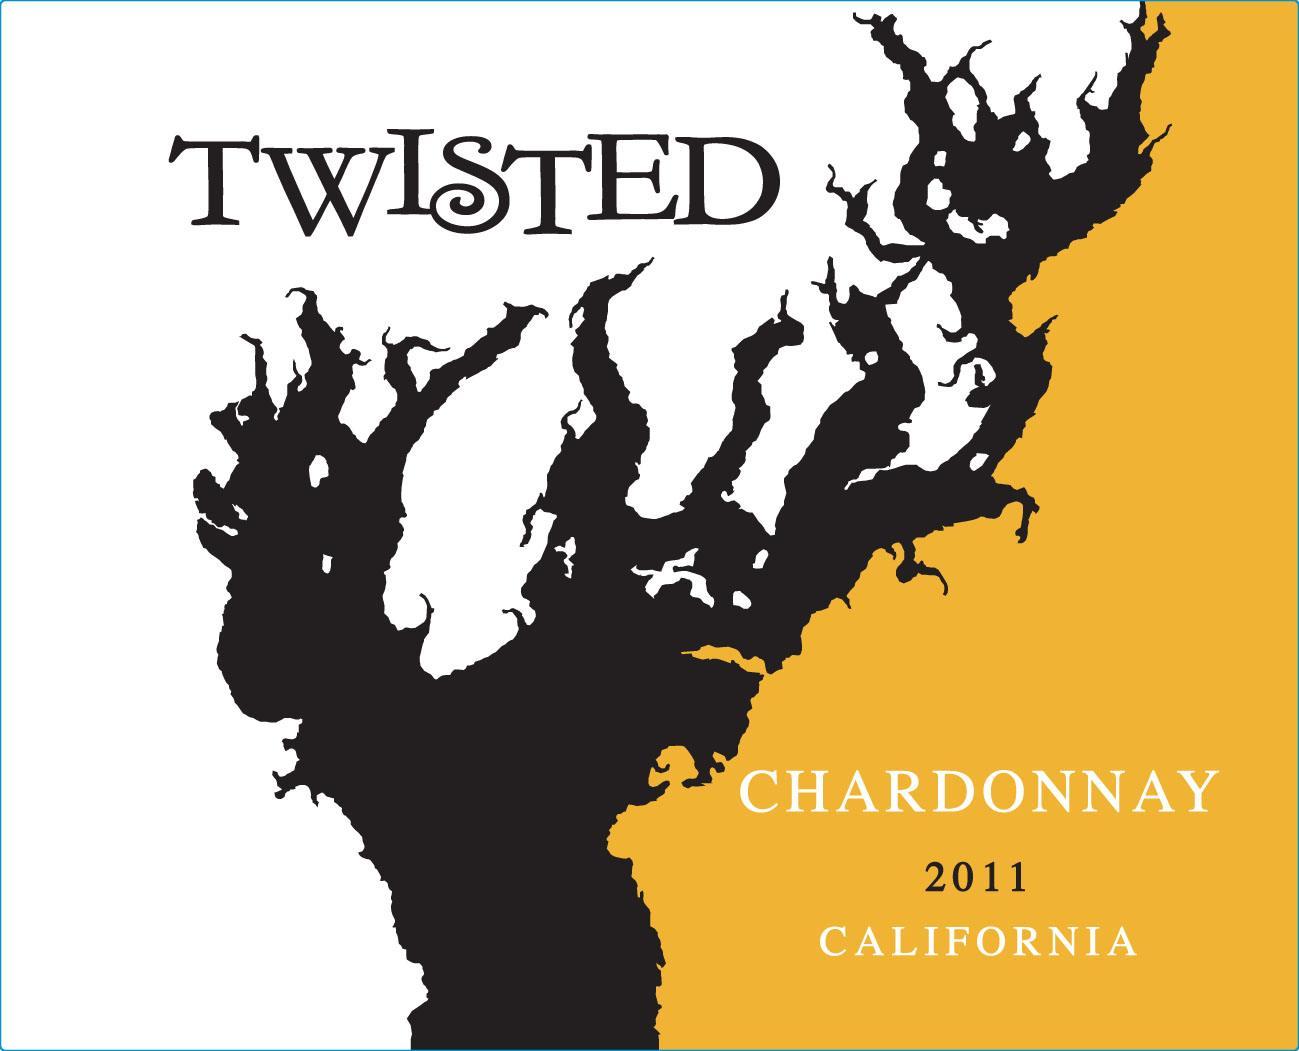 Twisted 2011 California Chardonnay FRONT